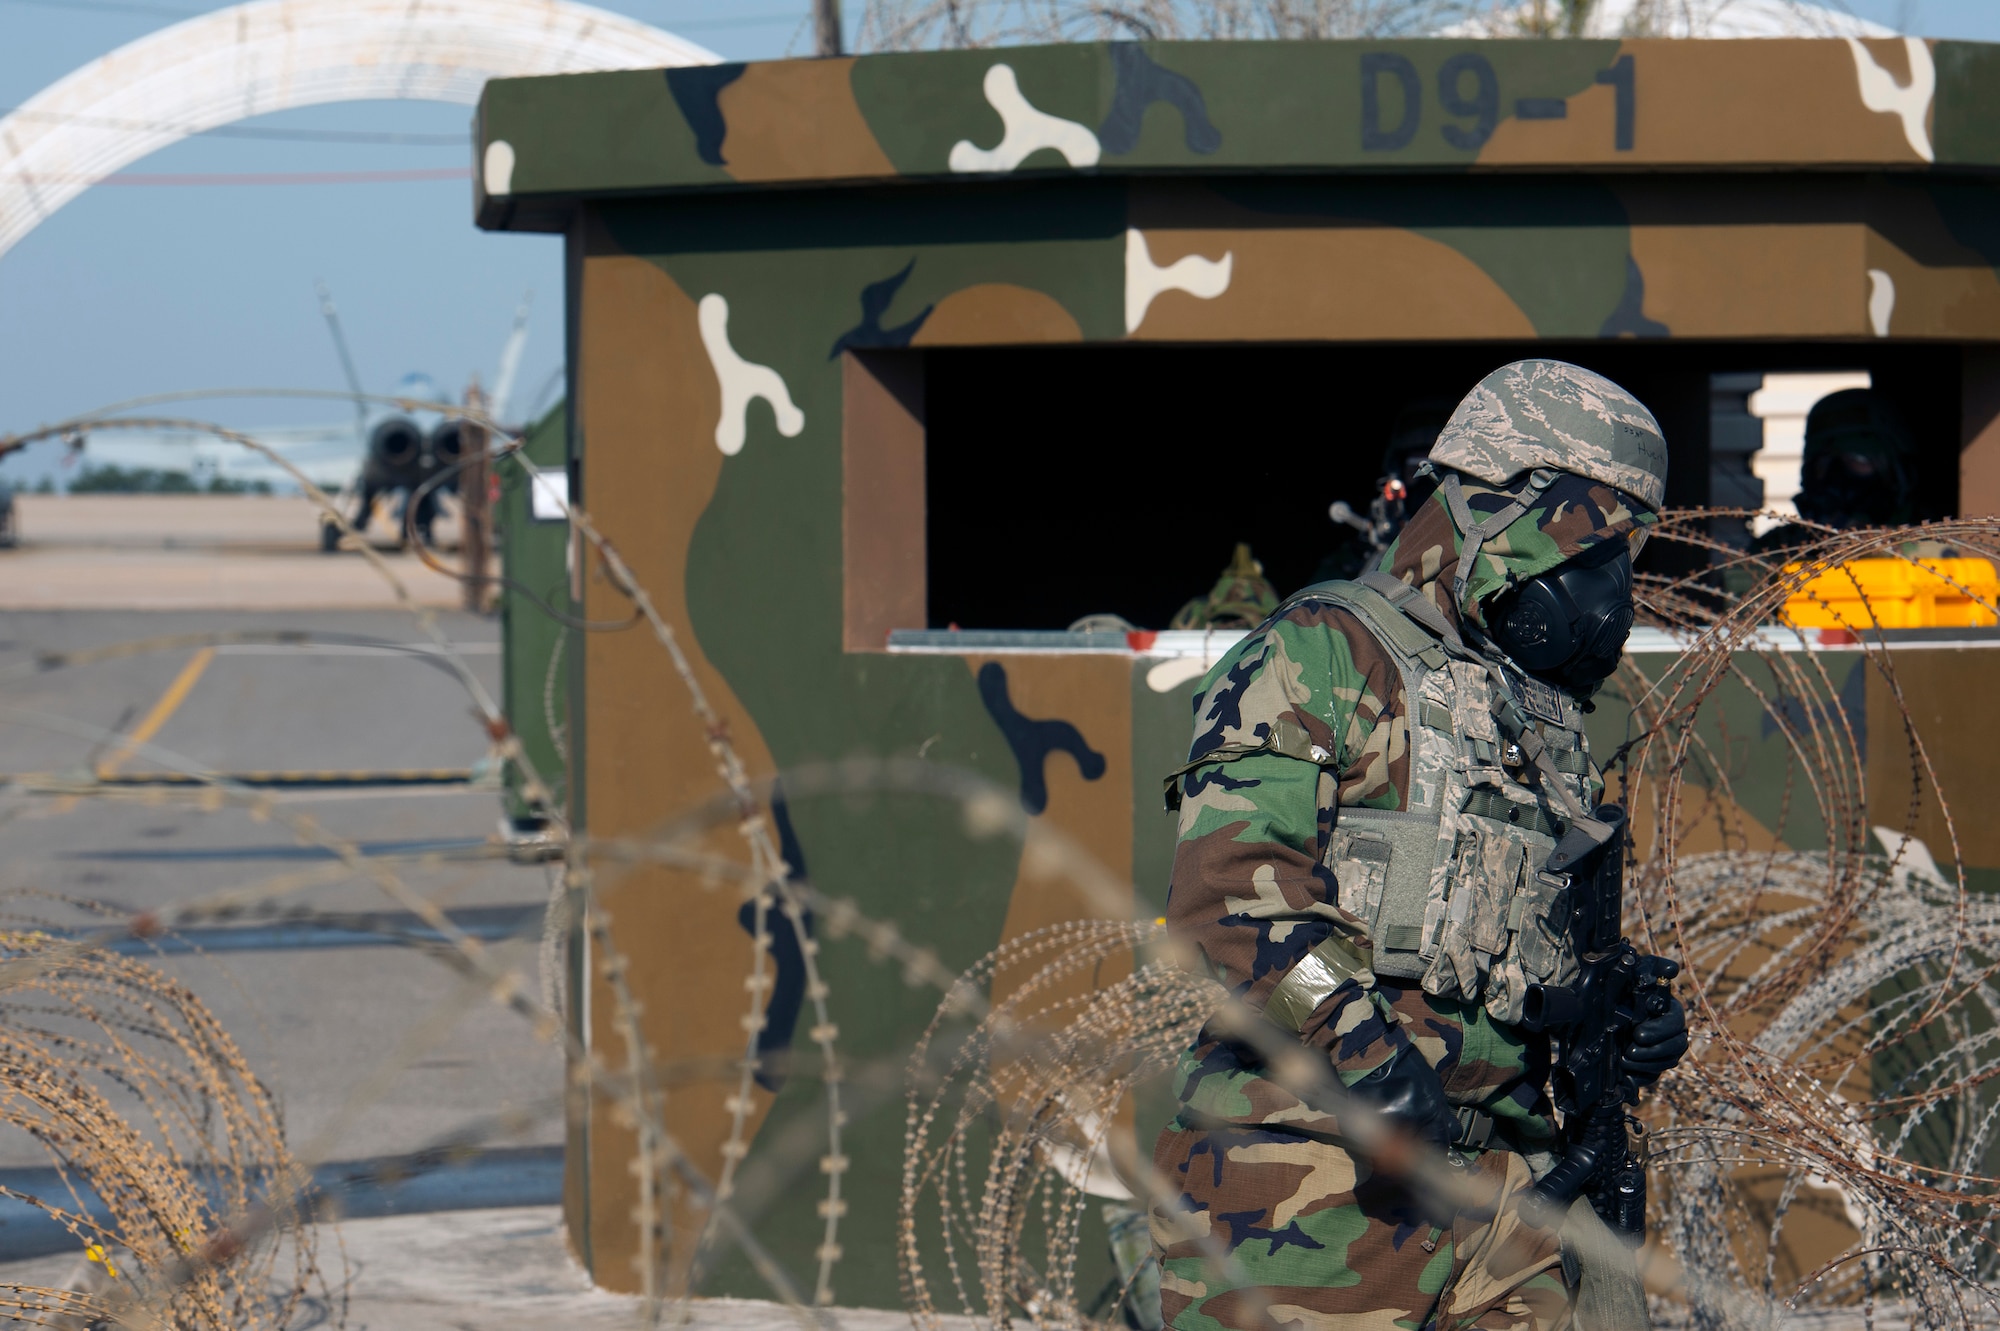 Staff Sgt. Mario Huerta, 8th Security Forces Squadron response force leader, walks through an entry control point during Exercise Beverly Midnight 16-3 at Kunsan Air Base, Republic of Korea, May 4, 2016. The exercise put Airmen to the test by incorporating building evacuation operations, ground, chemical, biological, radiological, nuclear and high-yield explosive attacks, unexploded ordinance detection, and self-aid and buddy care techniques into scenarios throughout the week. (U.S. Air Force photo by Staff Sgt. Nick Wilson/Released)